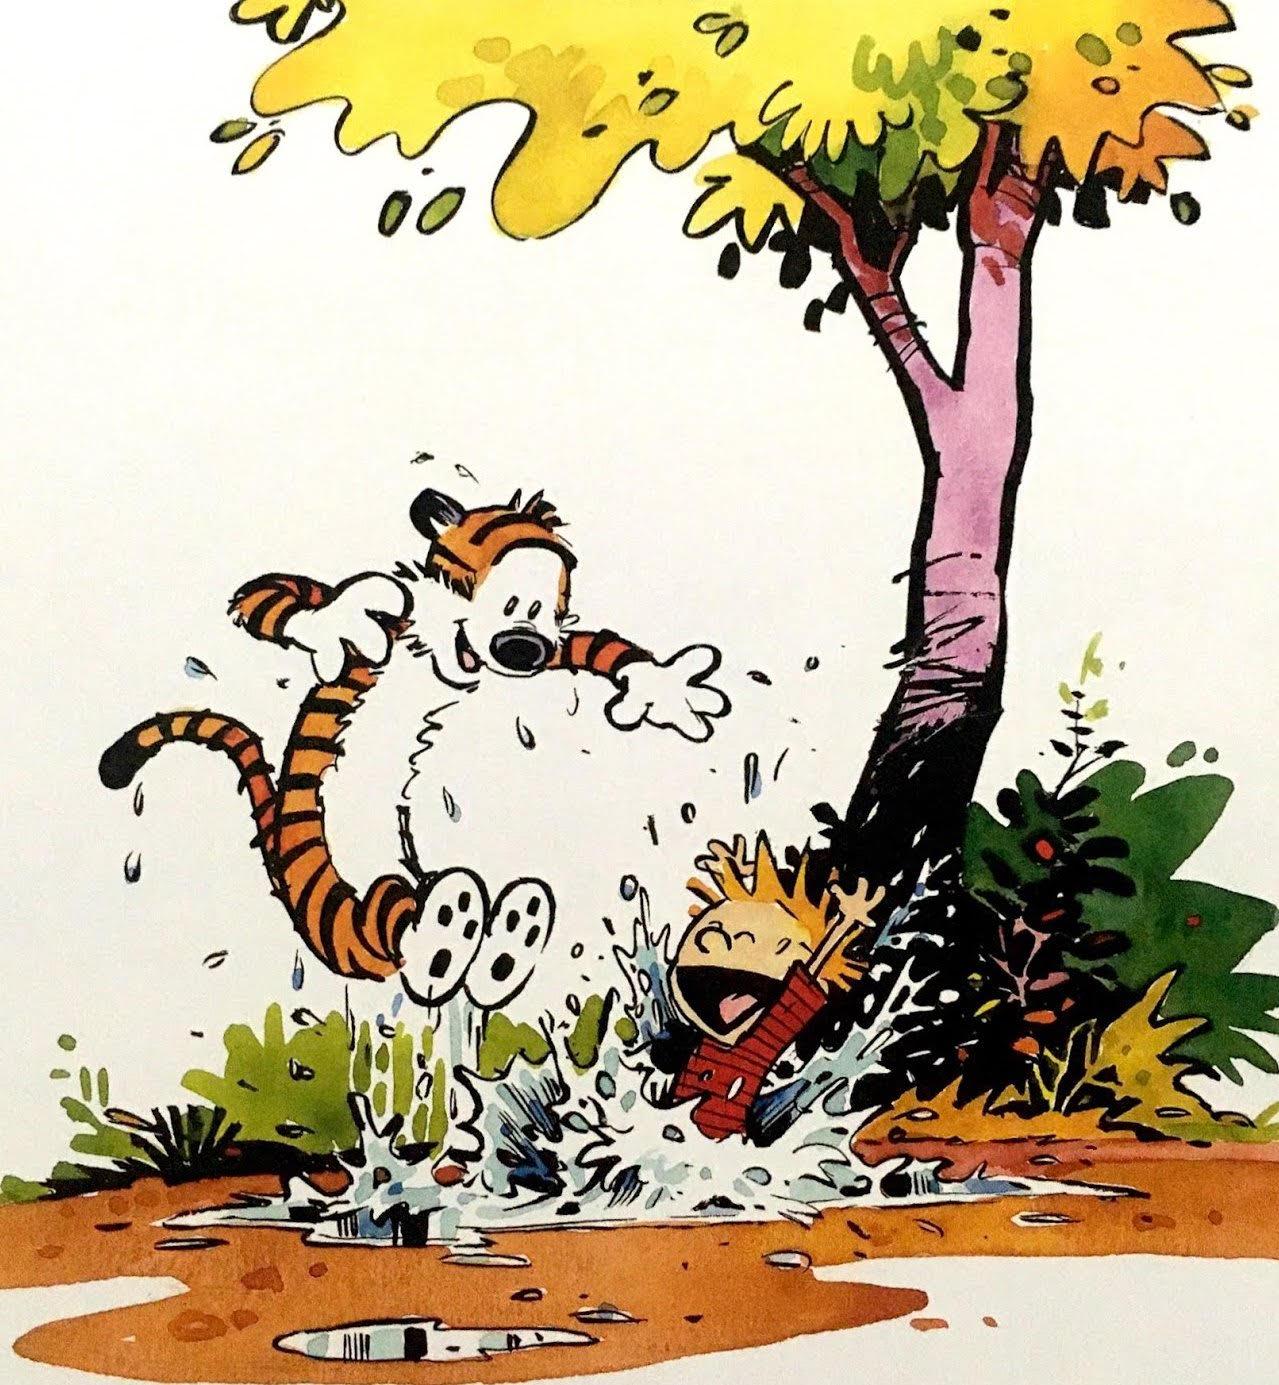 Calvin and Hobbs joyfully jumping in a puddle!